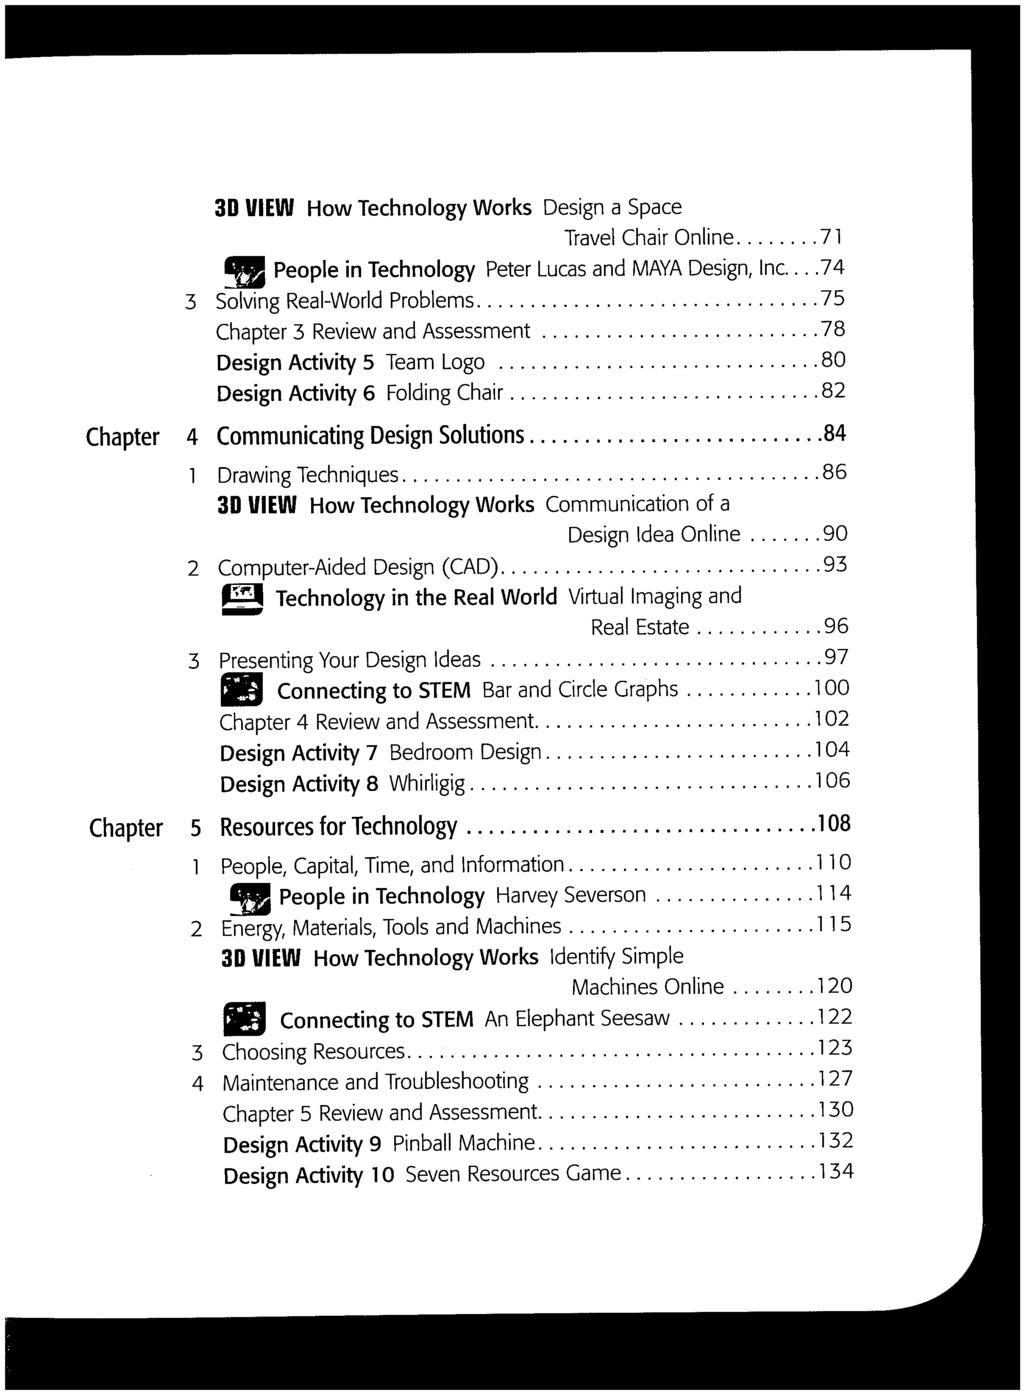 3D IfIE1AI How Technology Works Design a Space Travel Chair Online 71 People in Technology Peter Lucas and MAYA Design, Inc 74 Real-World Problems 75 3 Solving Chapter 3 Review and Assessment 78